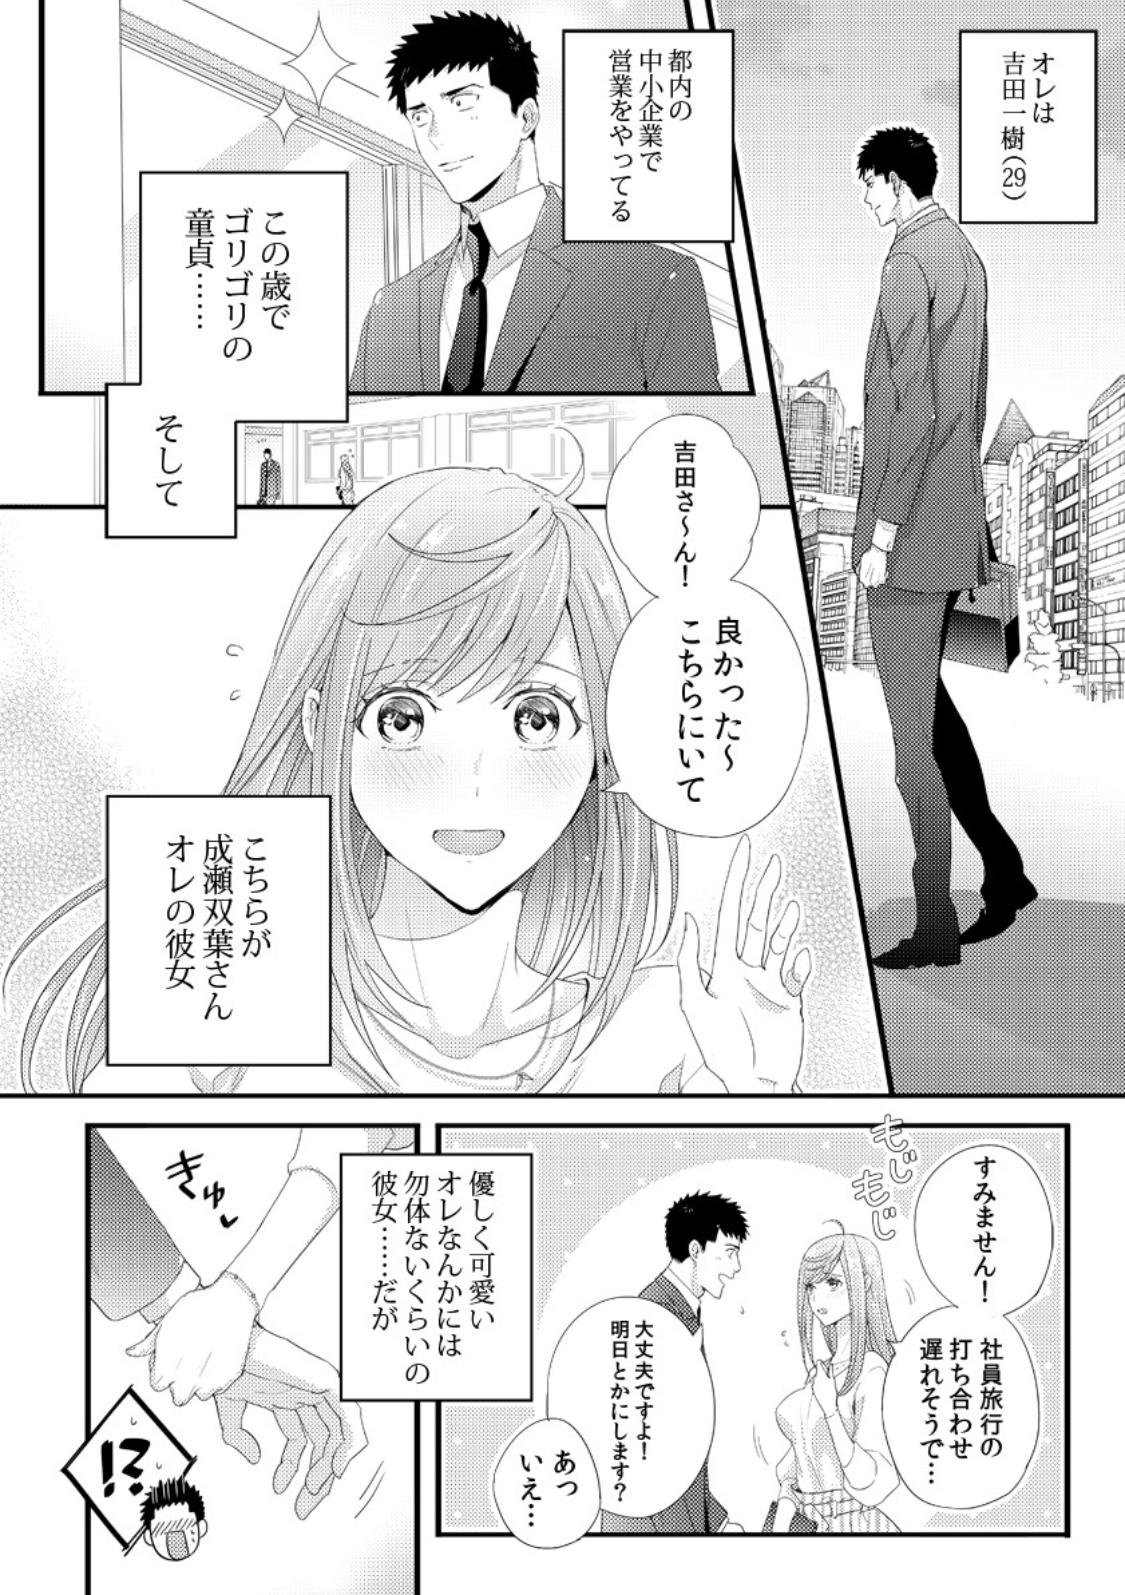 Please Let Me Hold You Futaba-San! Ch. 1+2 1